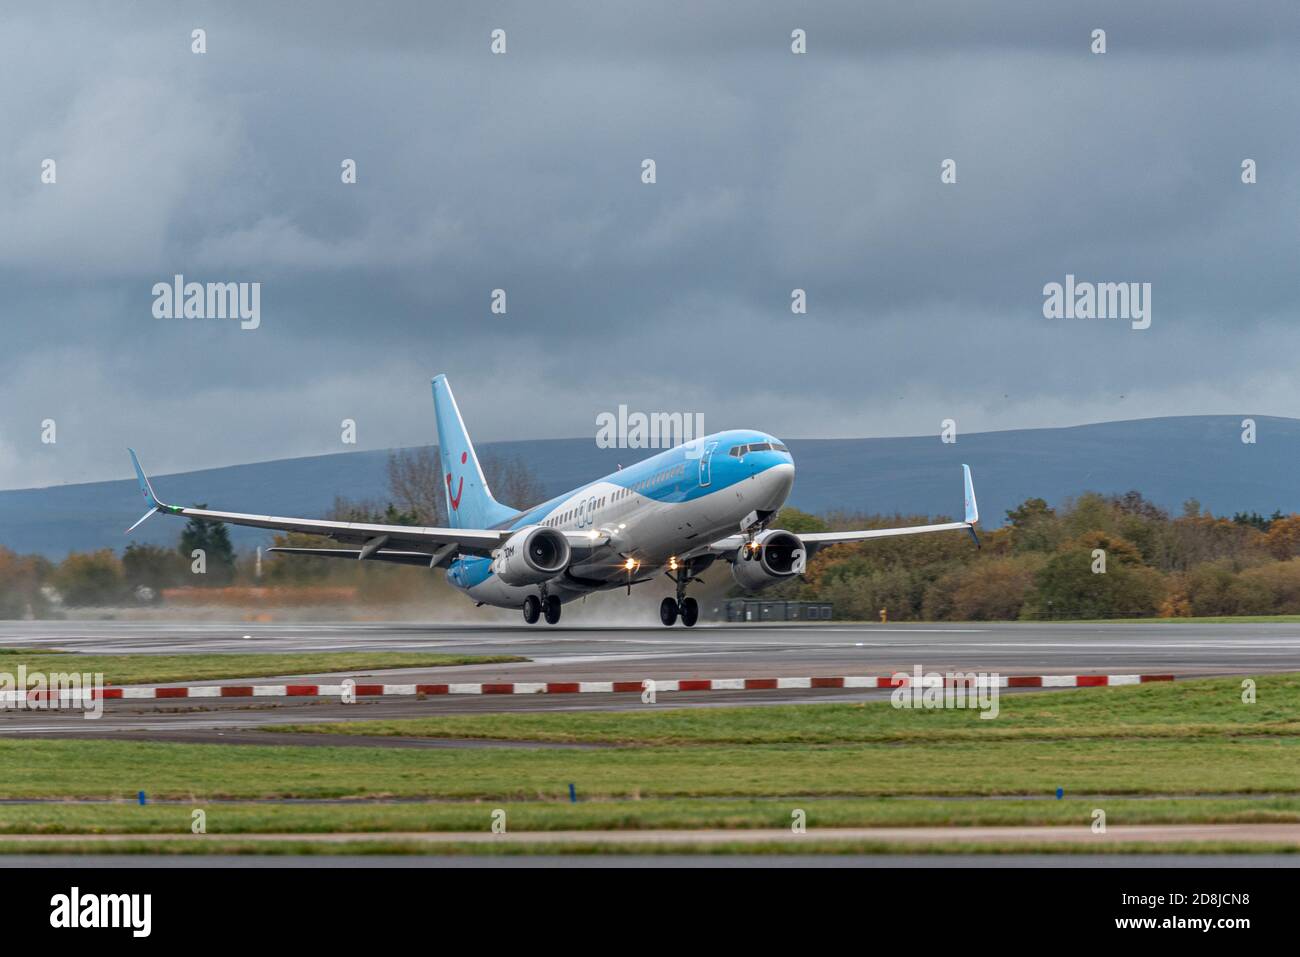 MANCHESTER, UK 30 OCTOBER 2020 - TUI Airways Boeing 737-8K5 flight BY2518 from to Corfu takes off from Manchester Airport in the rain. Stock Photo